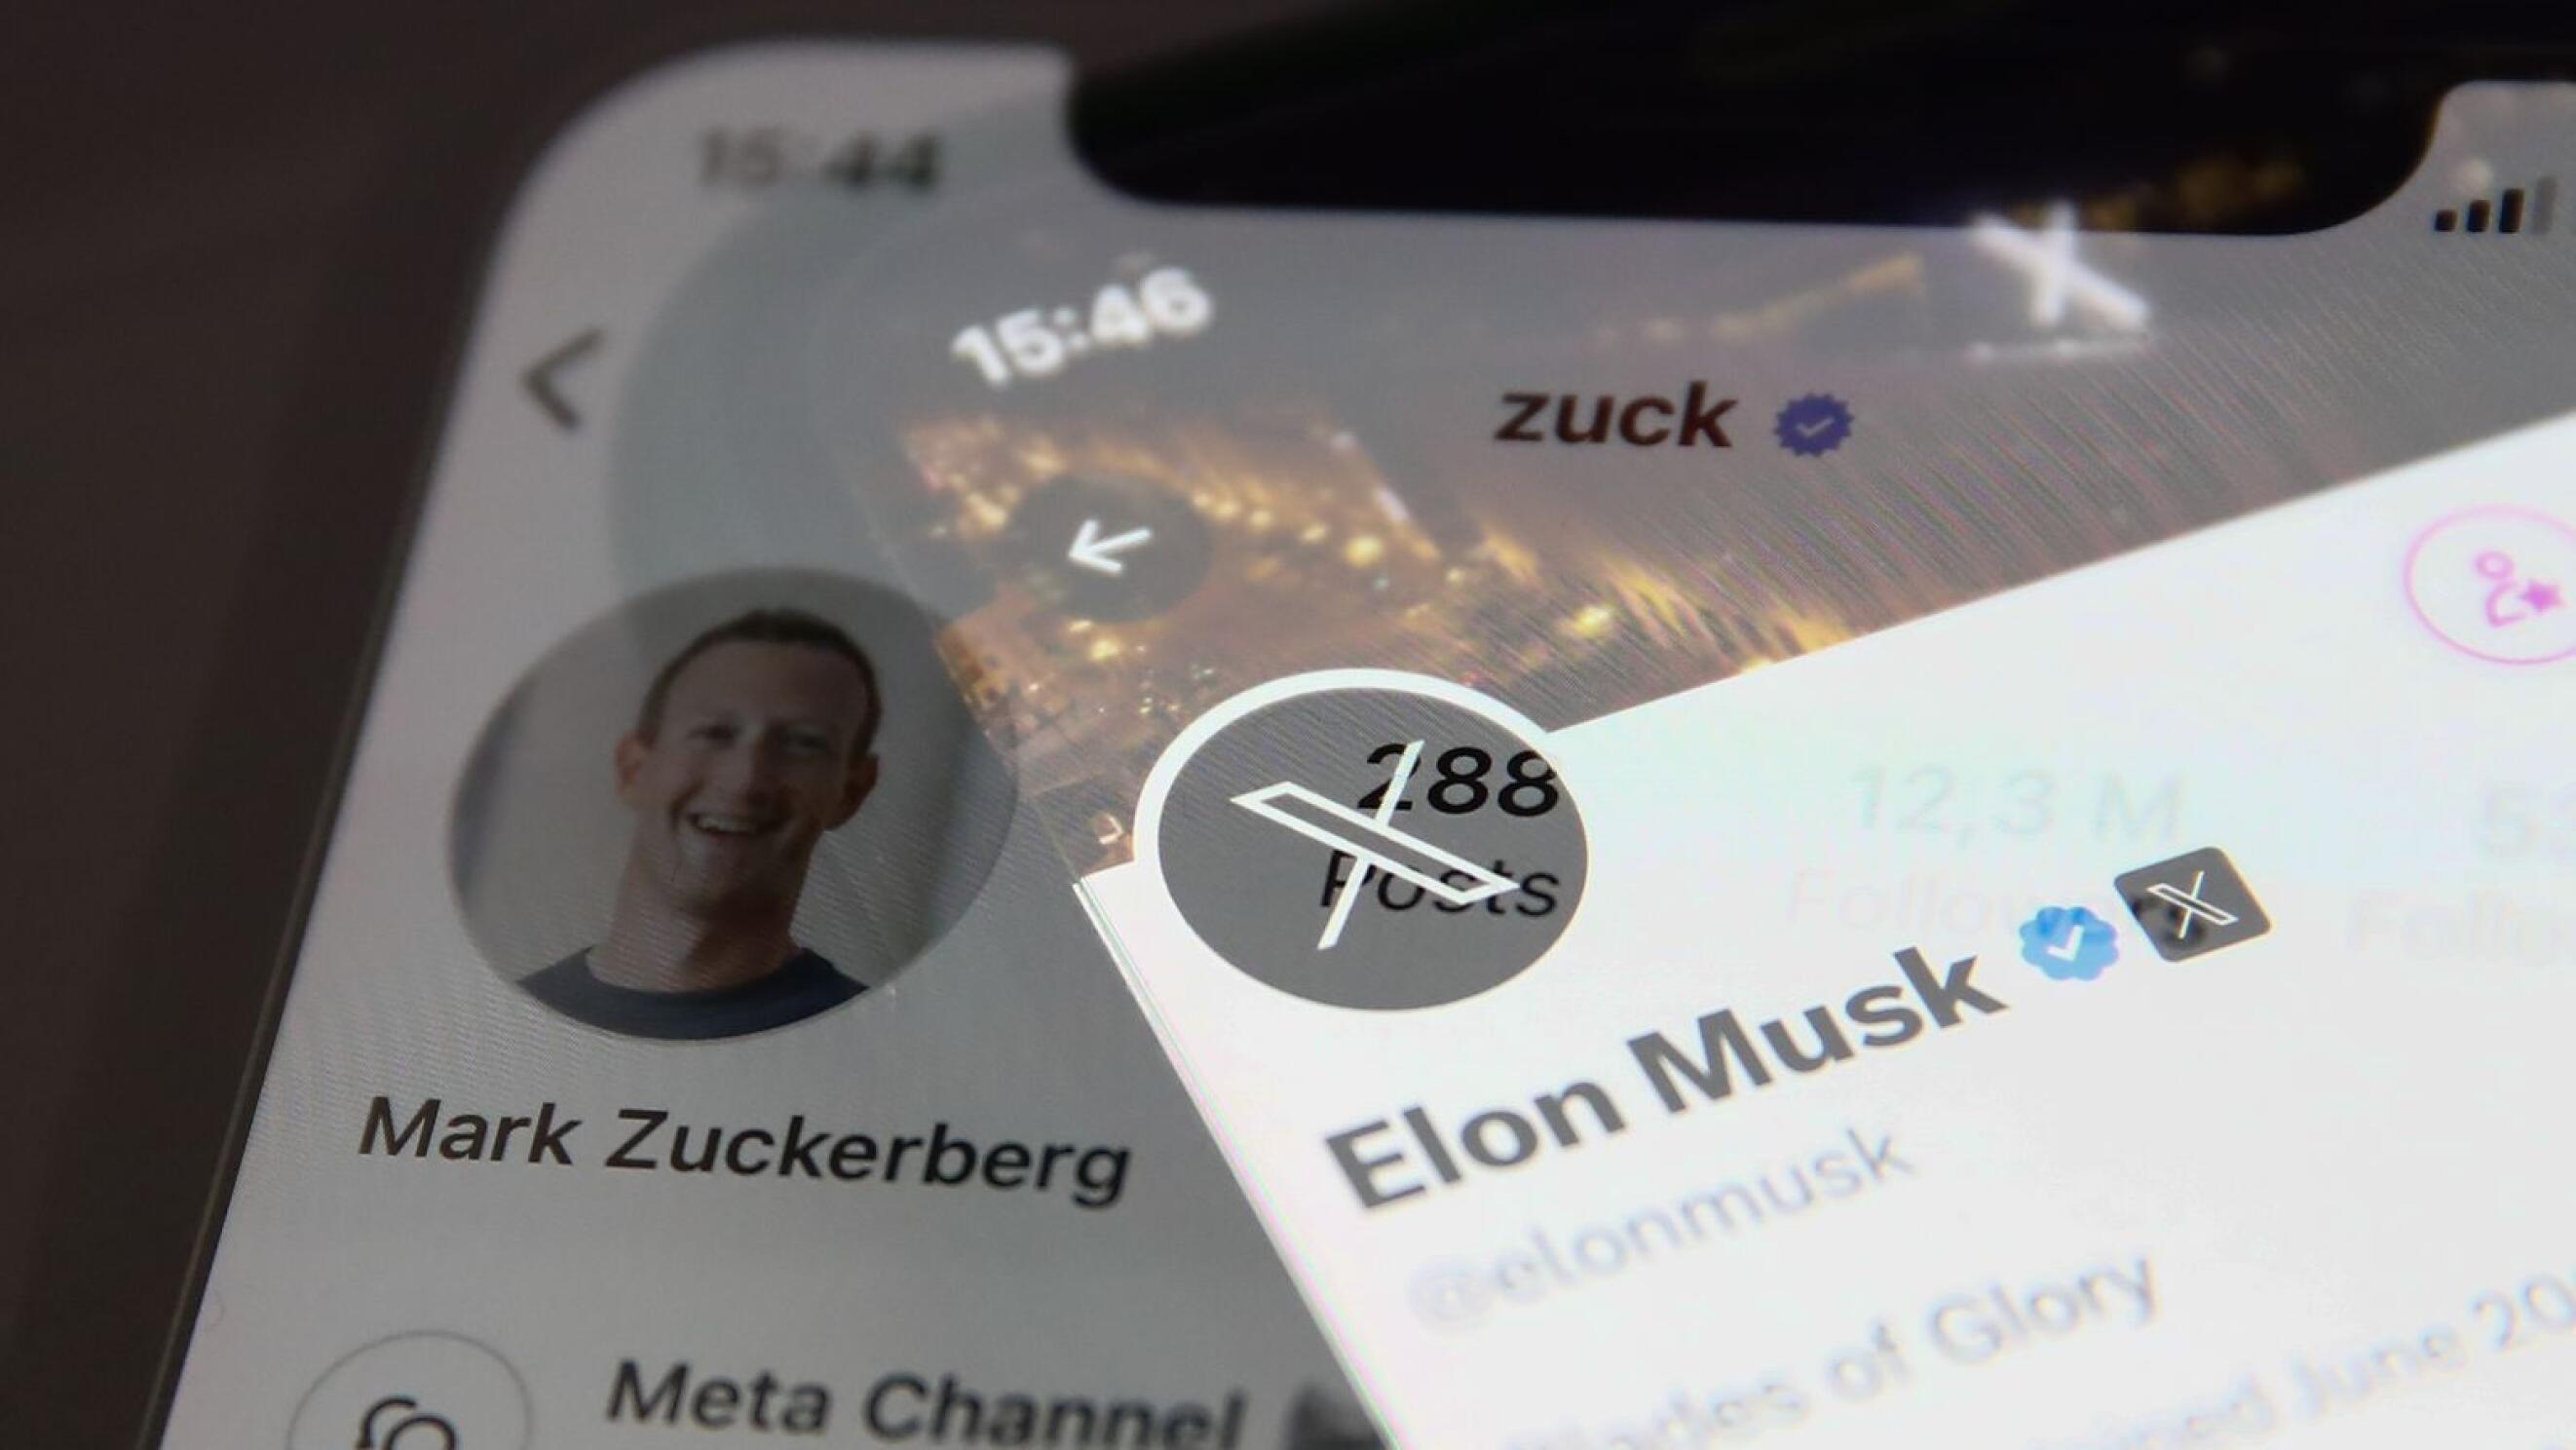 Mark Zuckerberg account on Instagram and Elon Musk account on X displayed on a phone screen